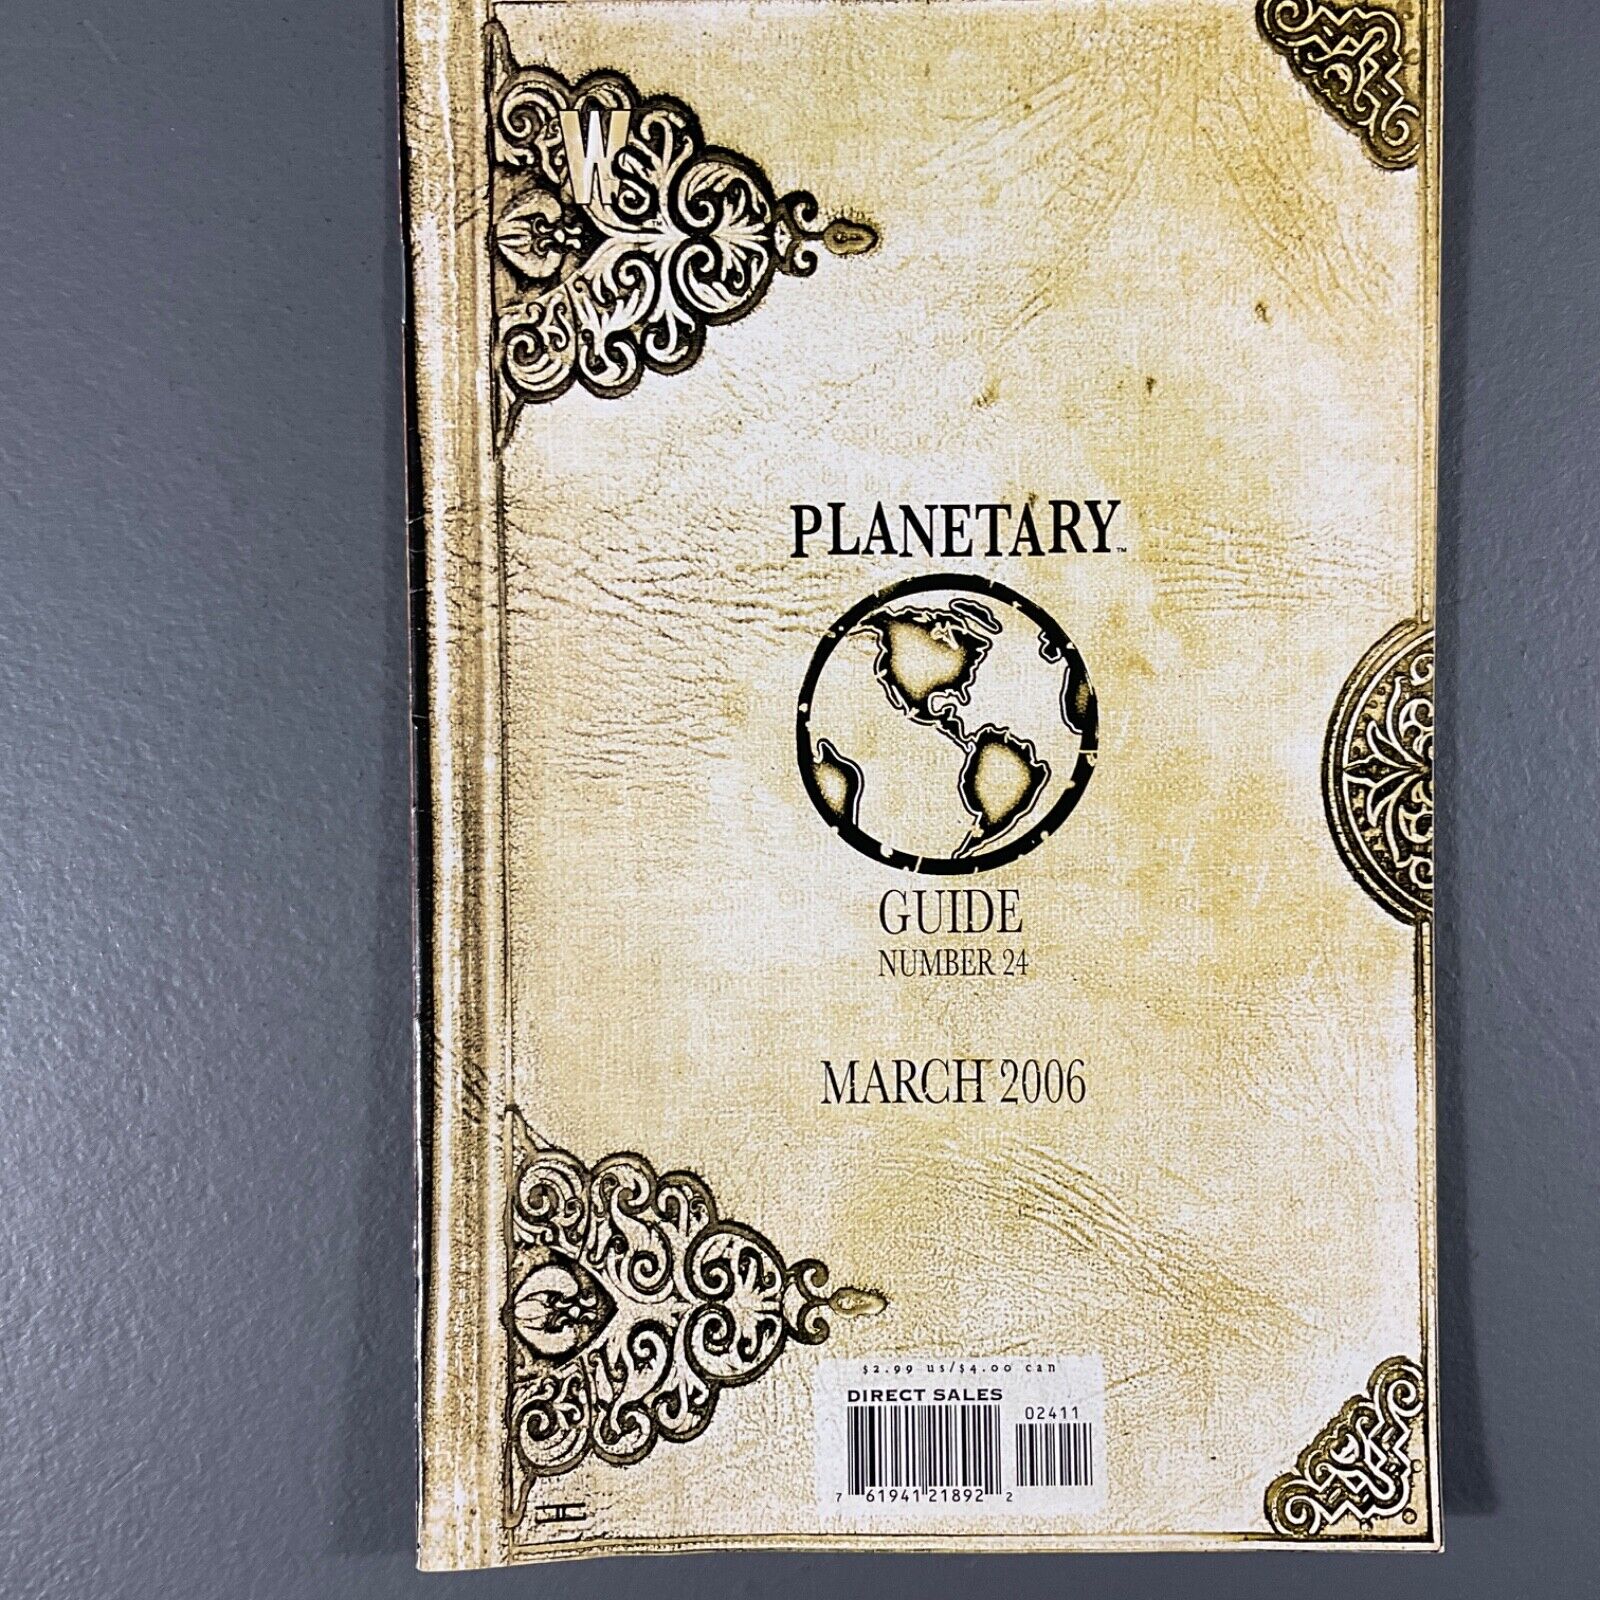 Planetary Guide By Richard Starkings Wildstorm Comic Book Issue No. 24 - 2006